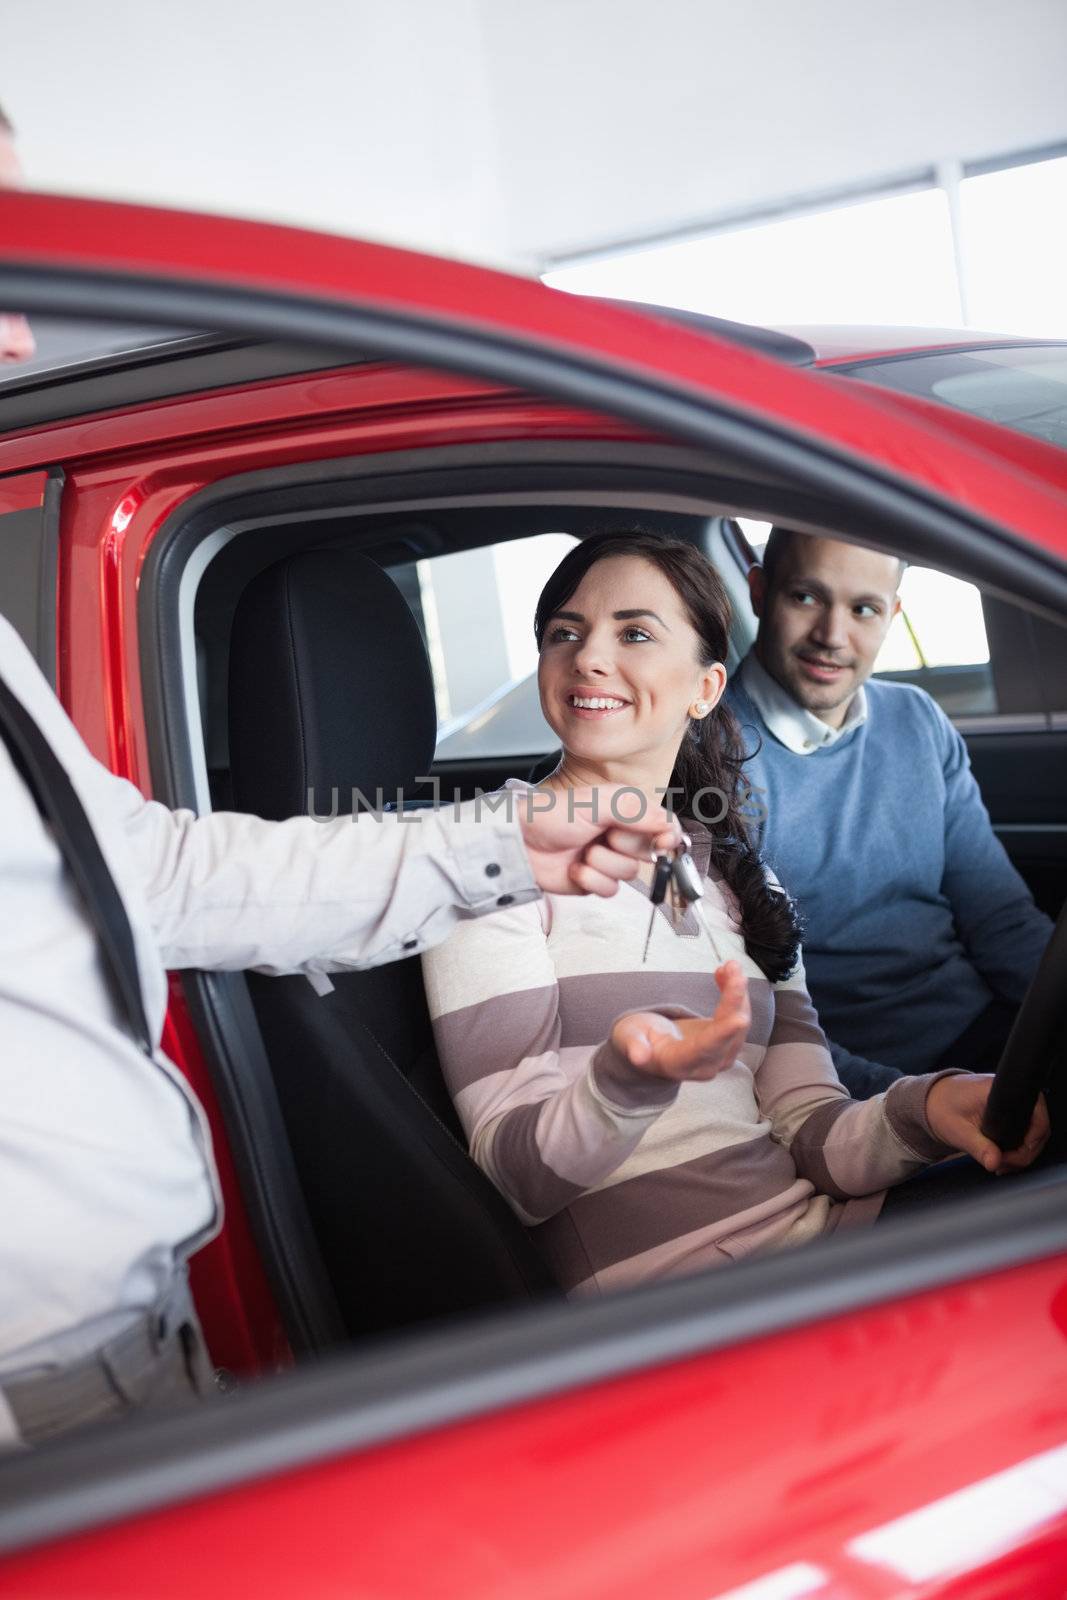 Smiling woman receiving keys from a salesman while sitting in a car